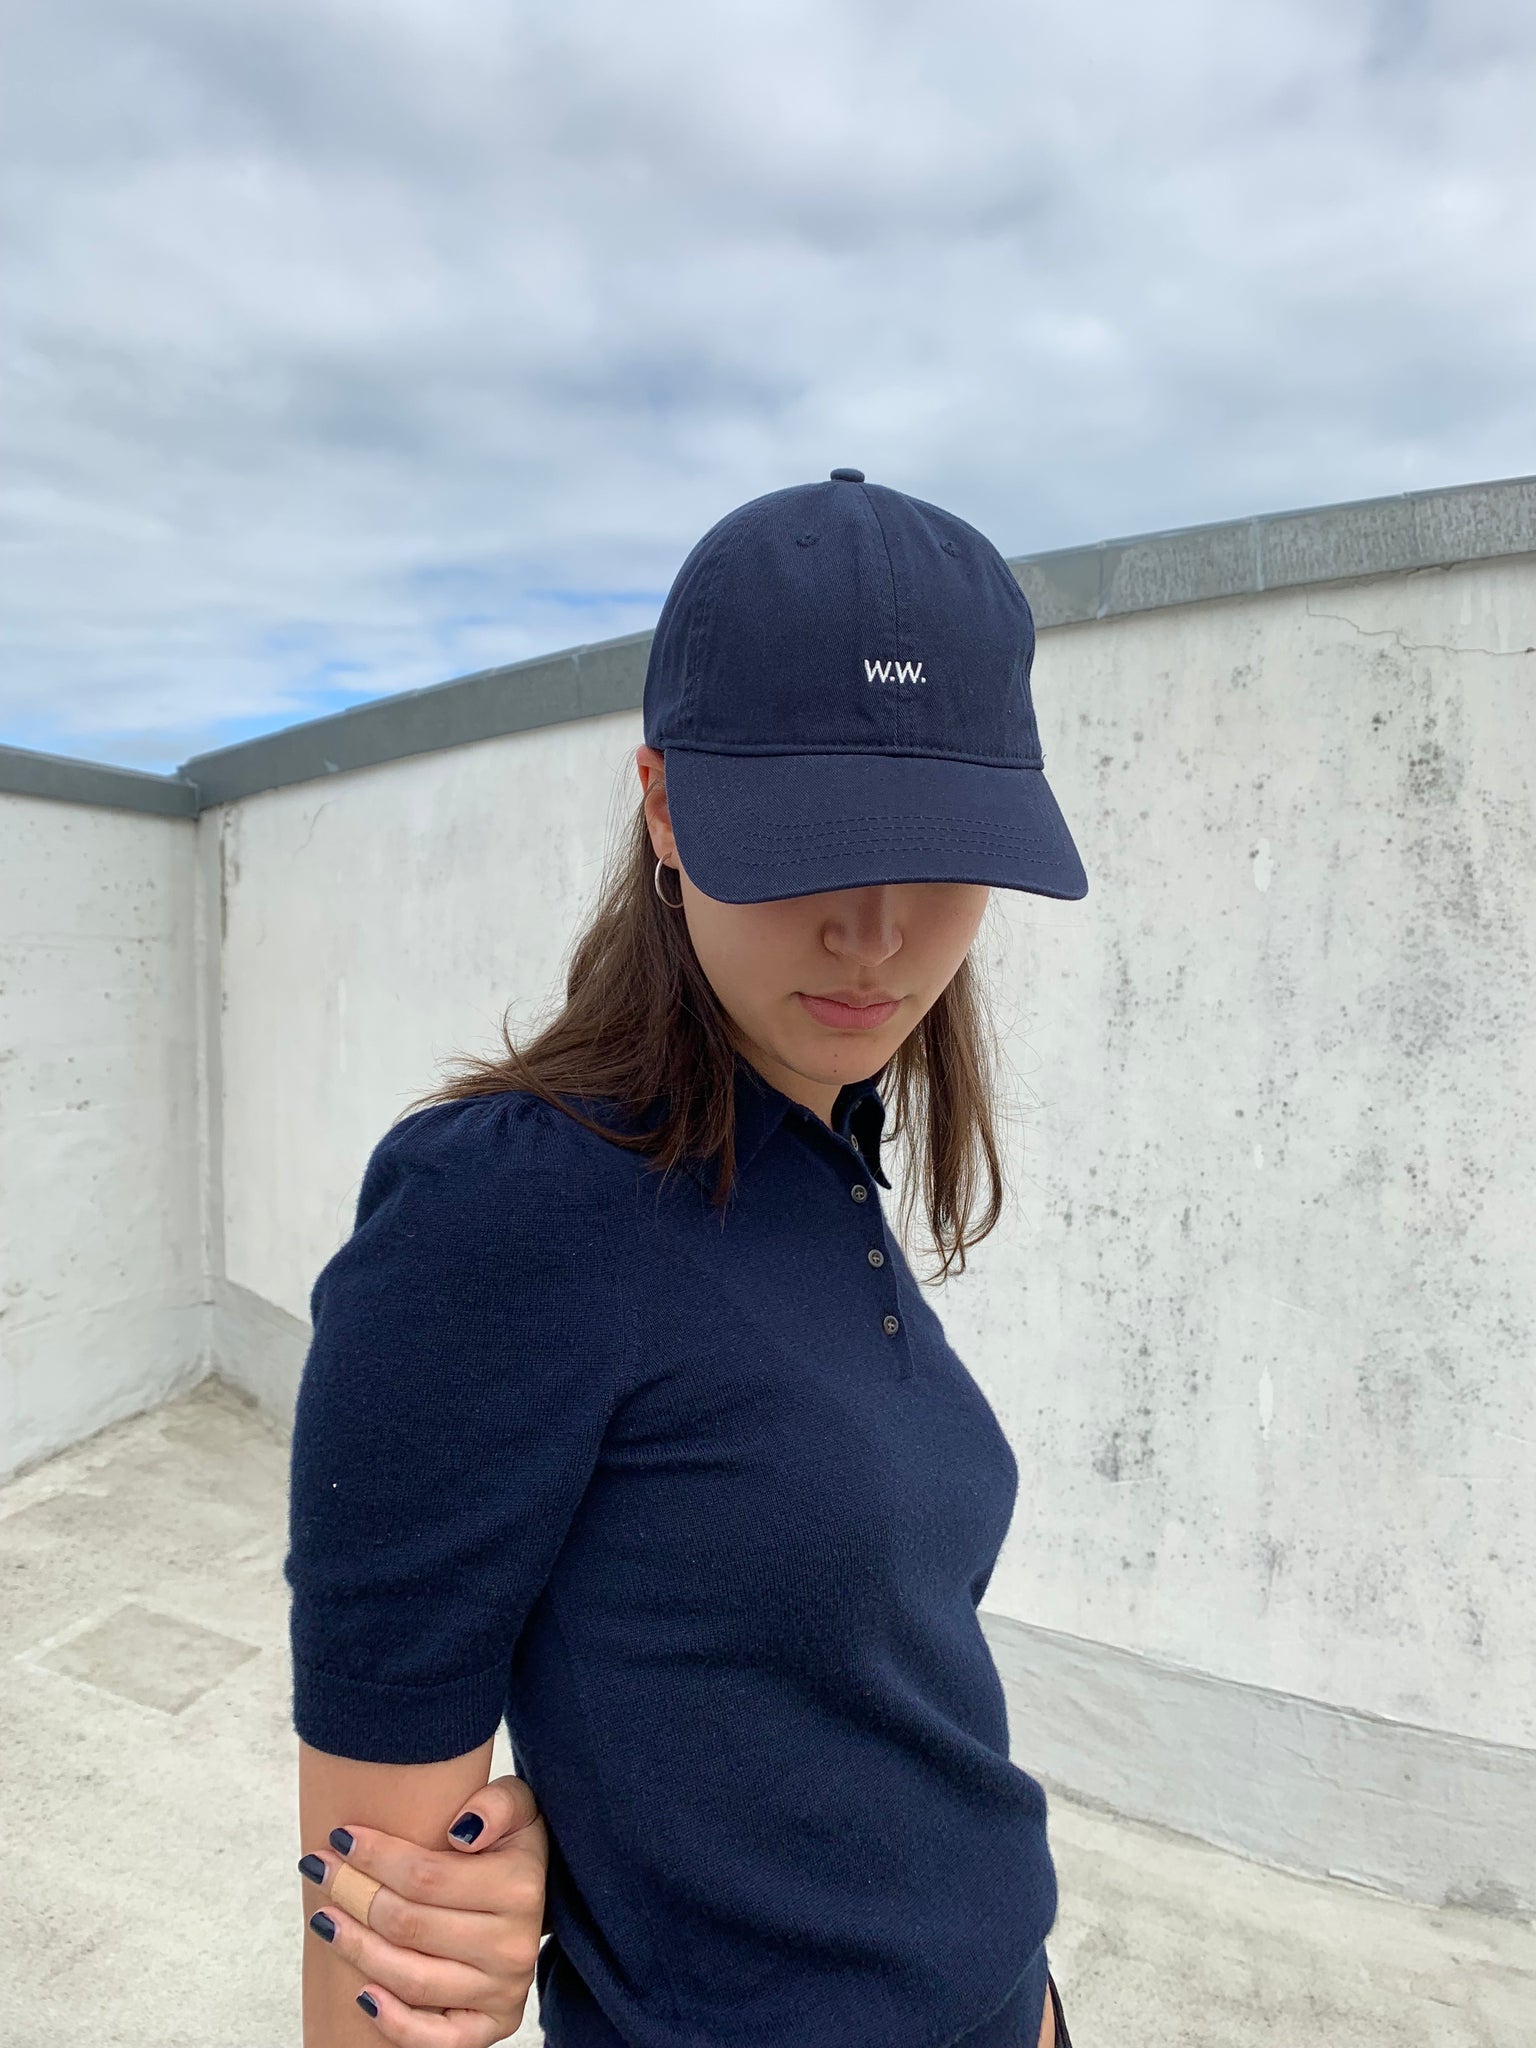 LOW PROFILE CAP IN NAVY BY WOOD WOOD